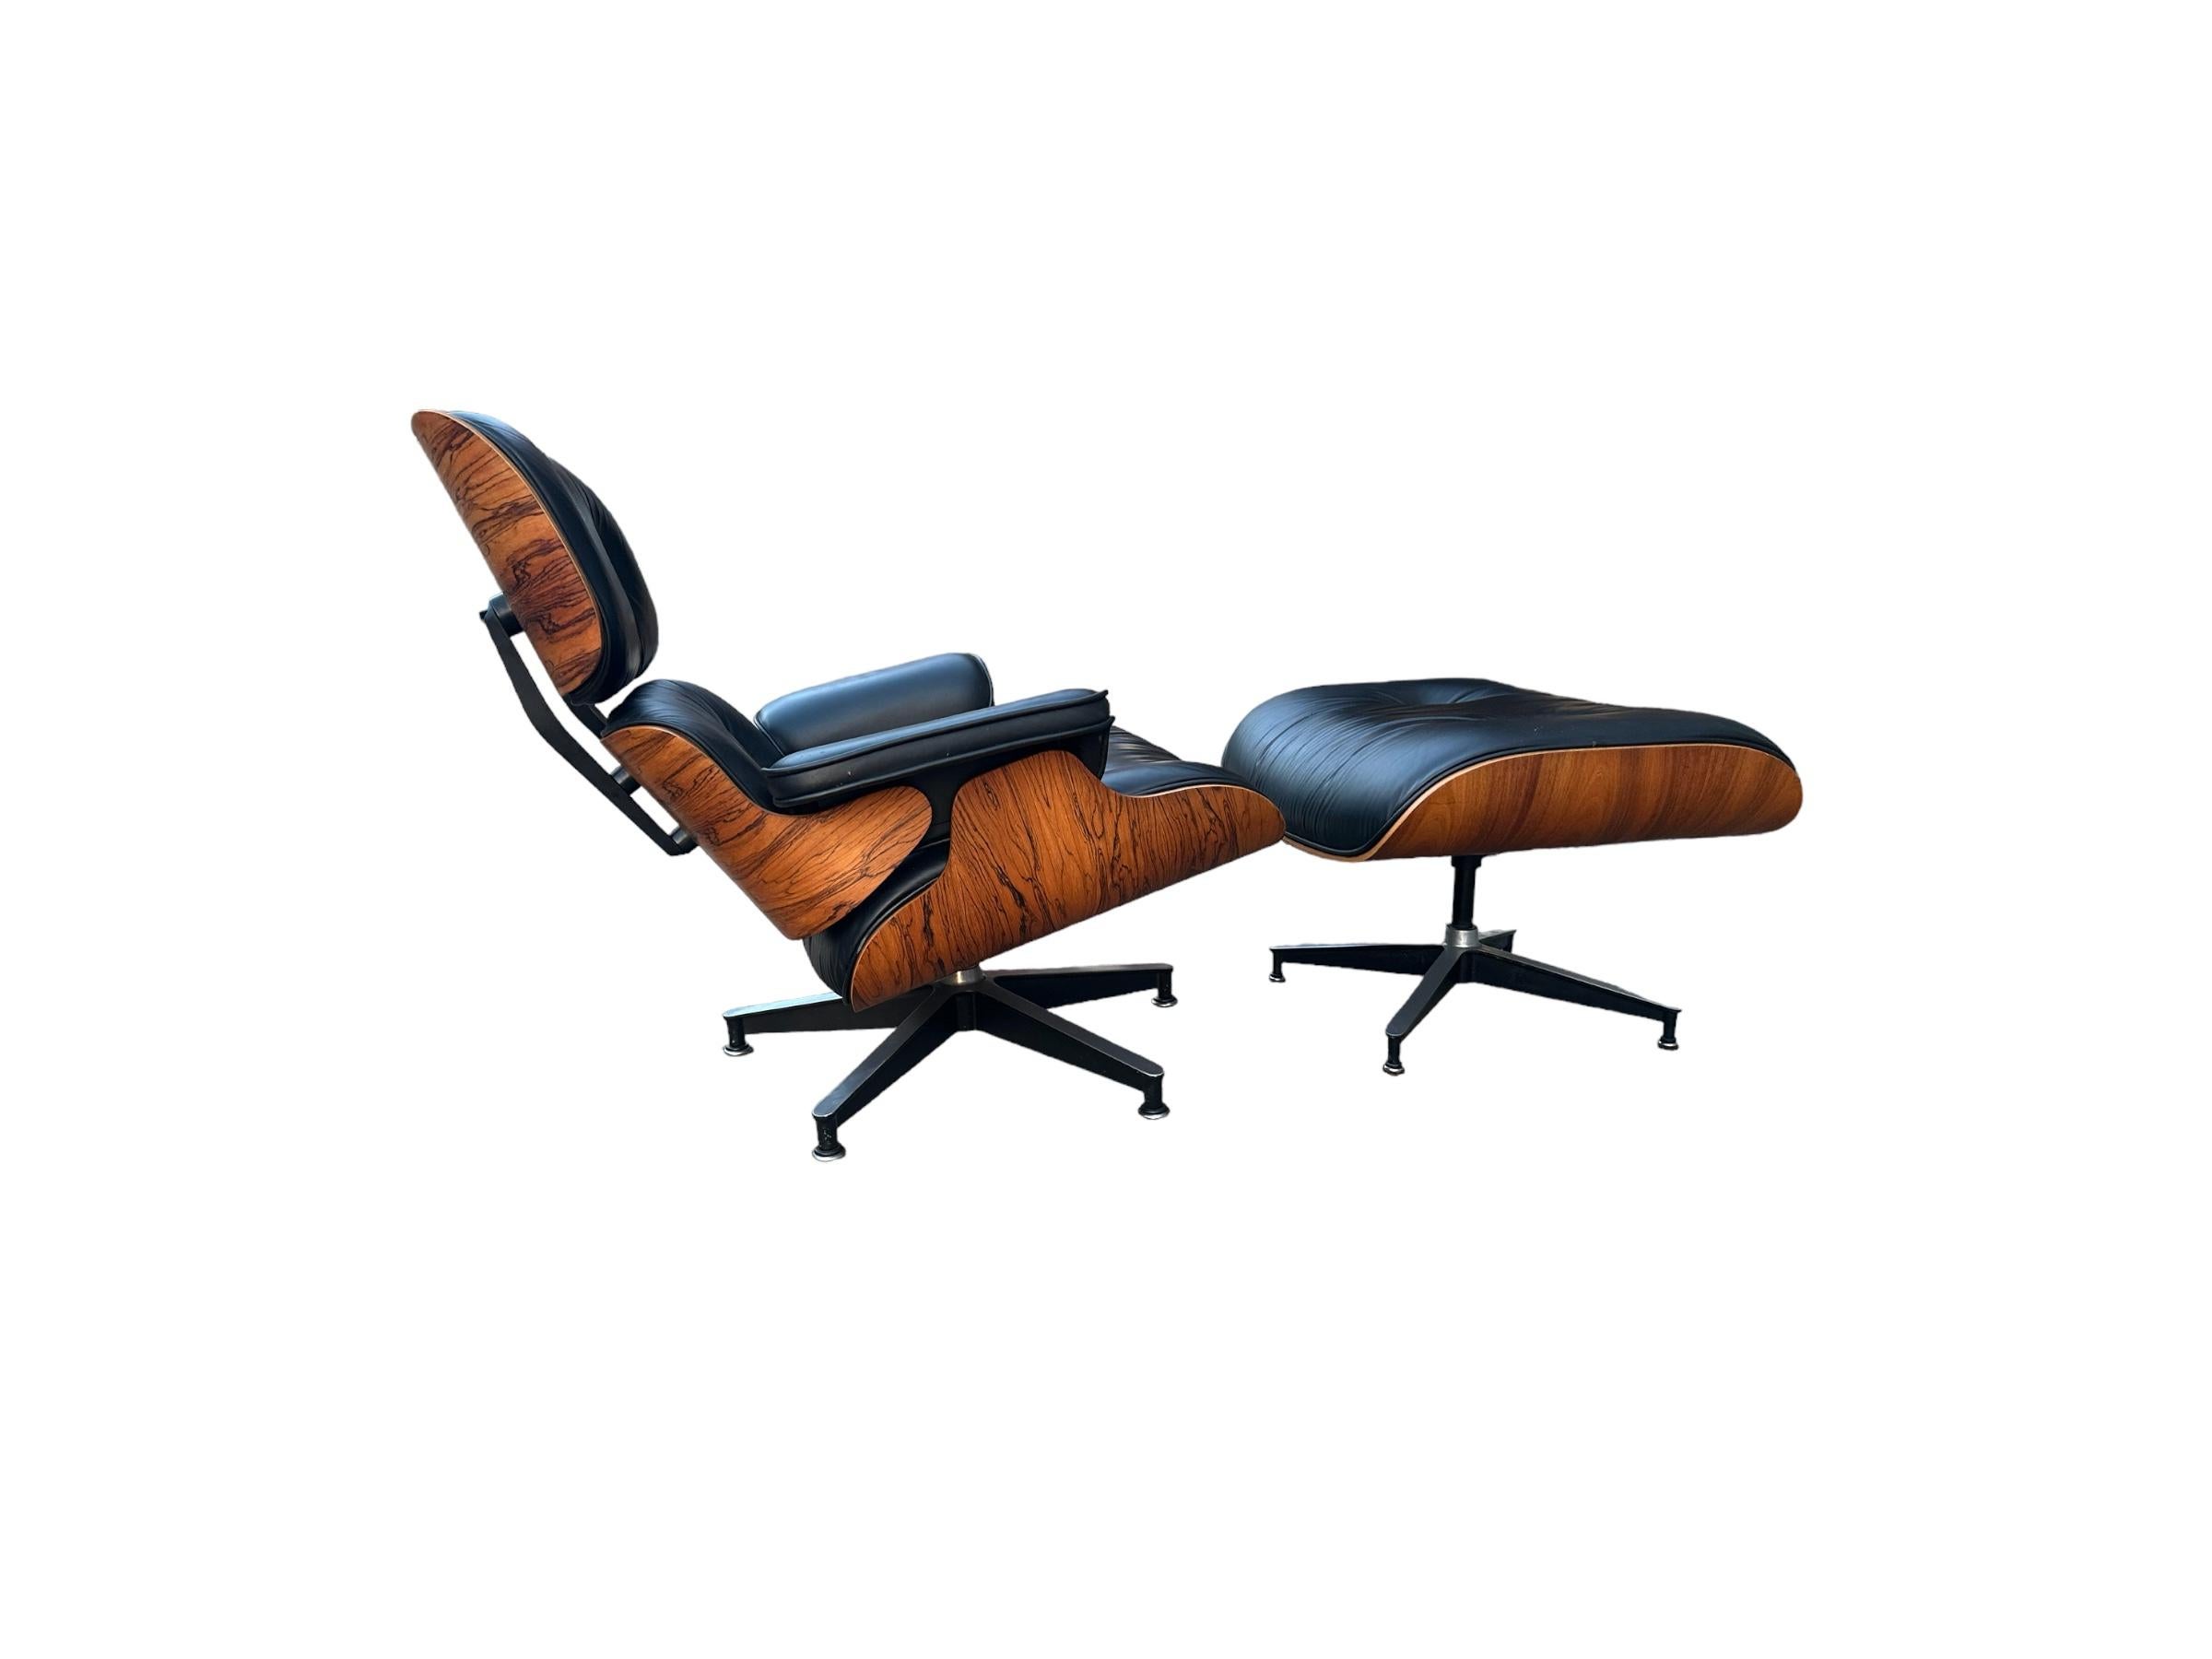 American Gorgeous Restored Eames Lounge Chair and Ottoman with Black Leather